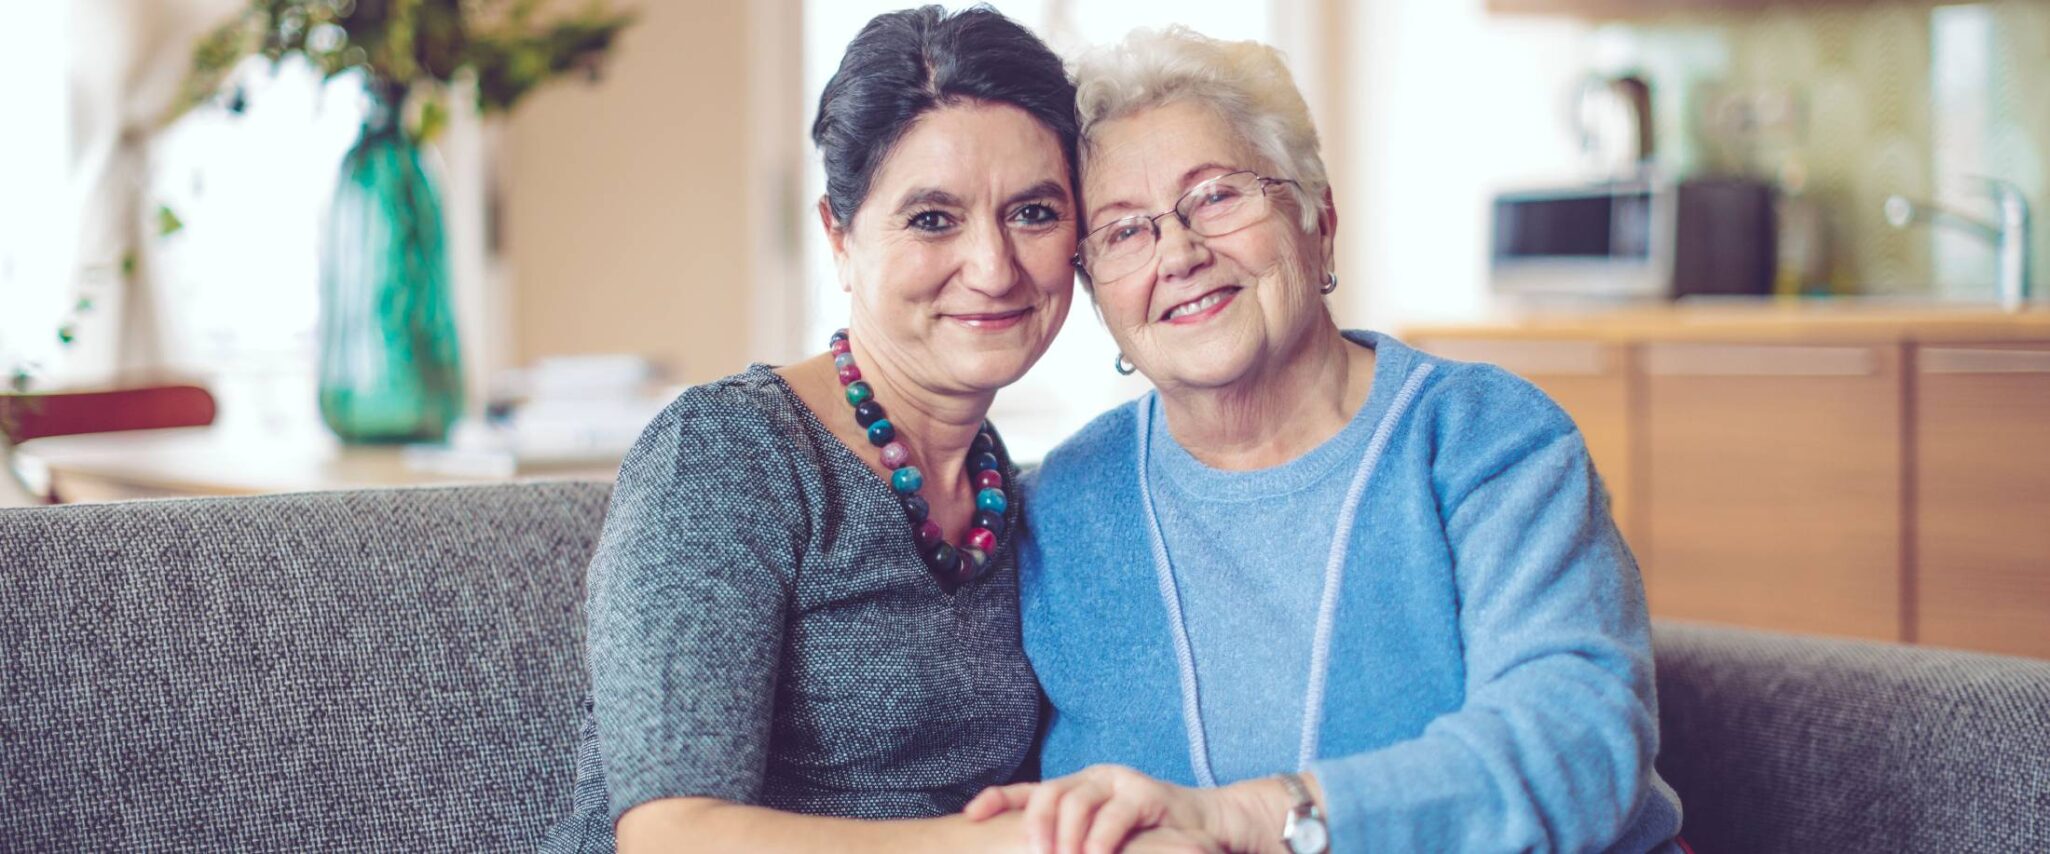 senior with a caregiver smiling looking at the camera